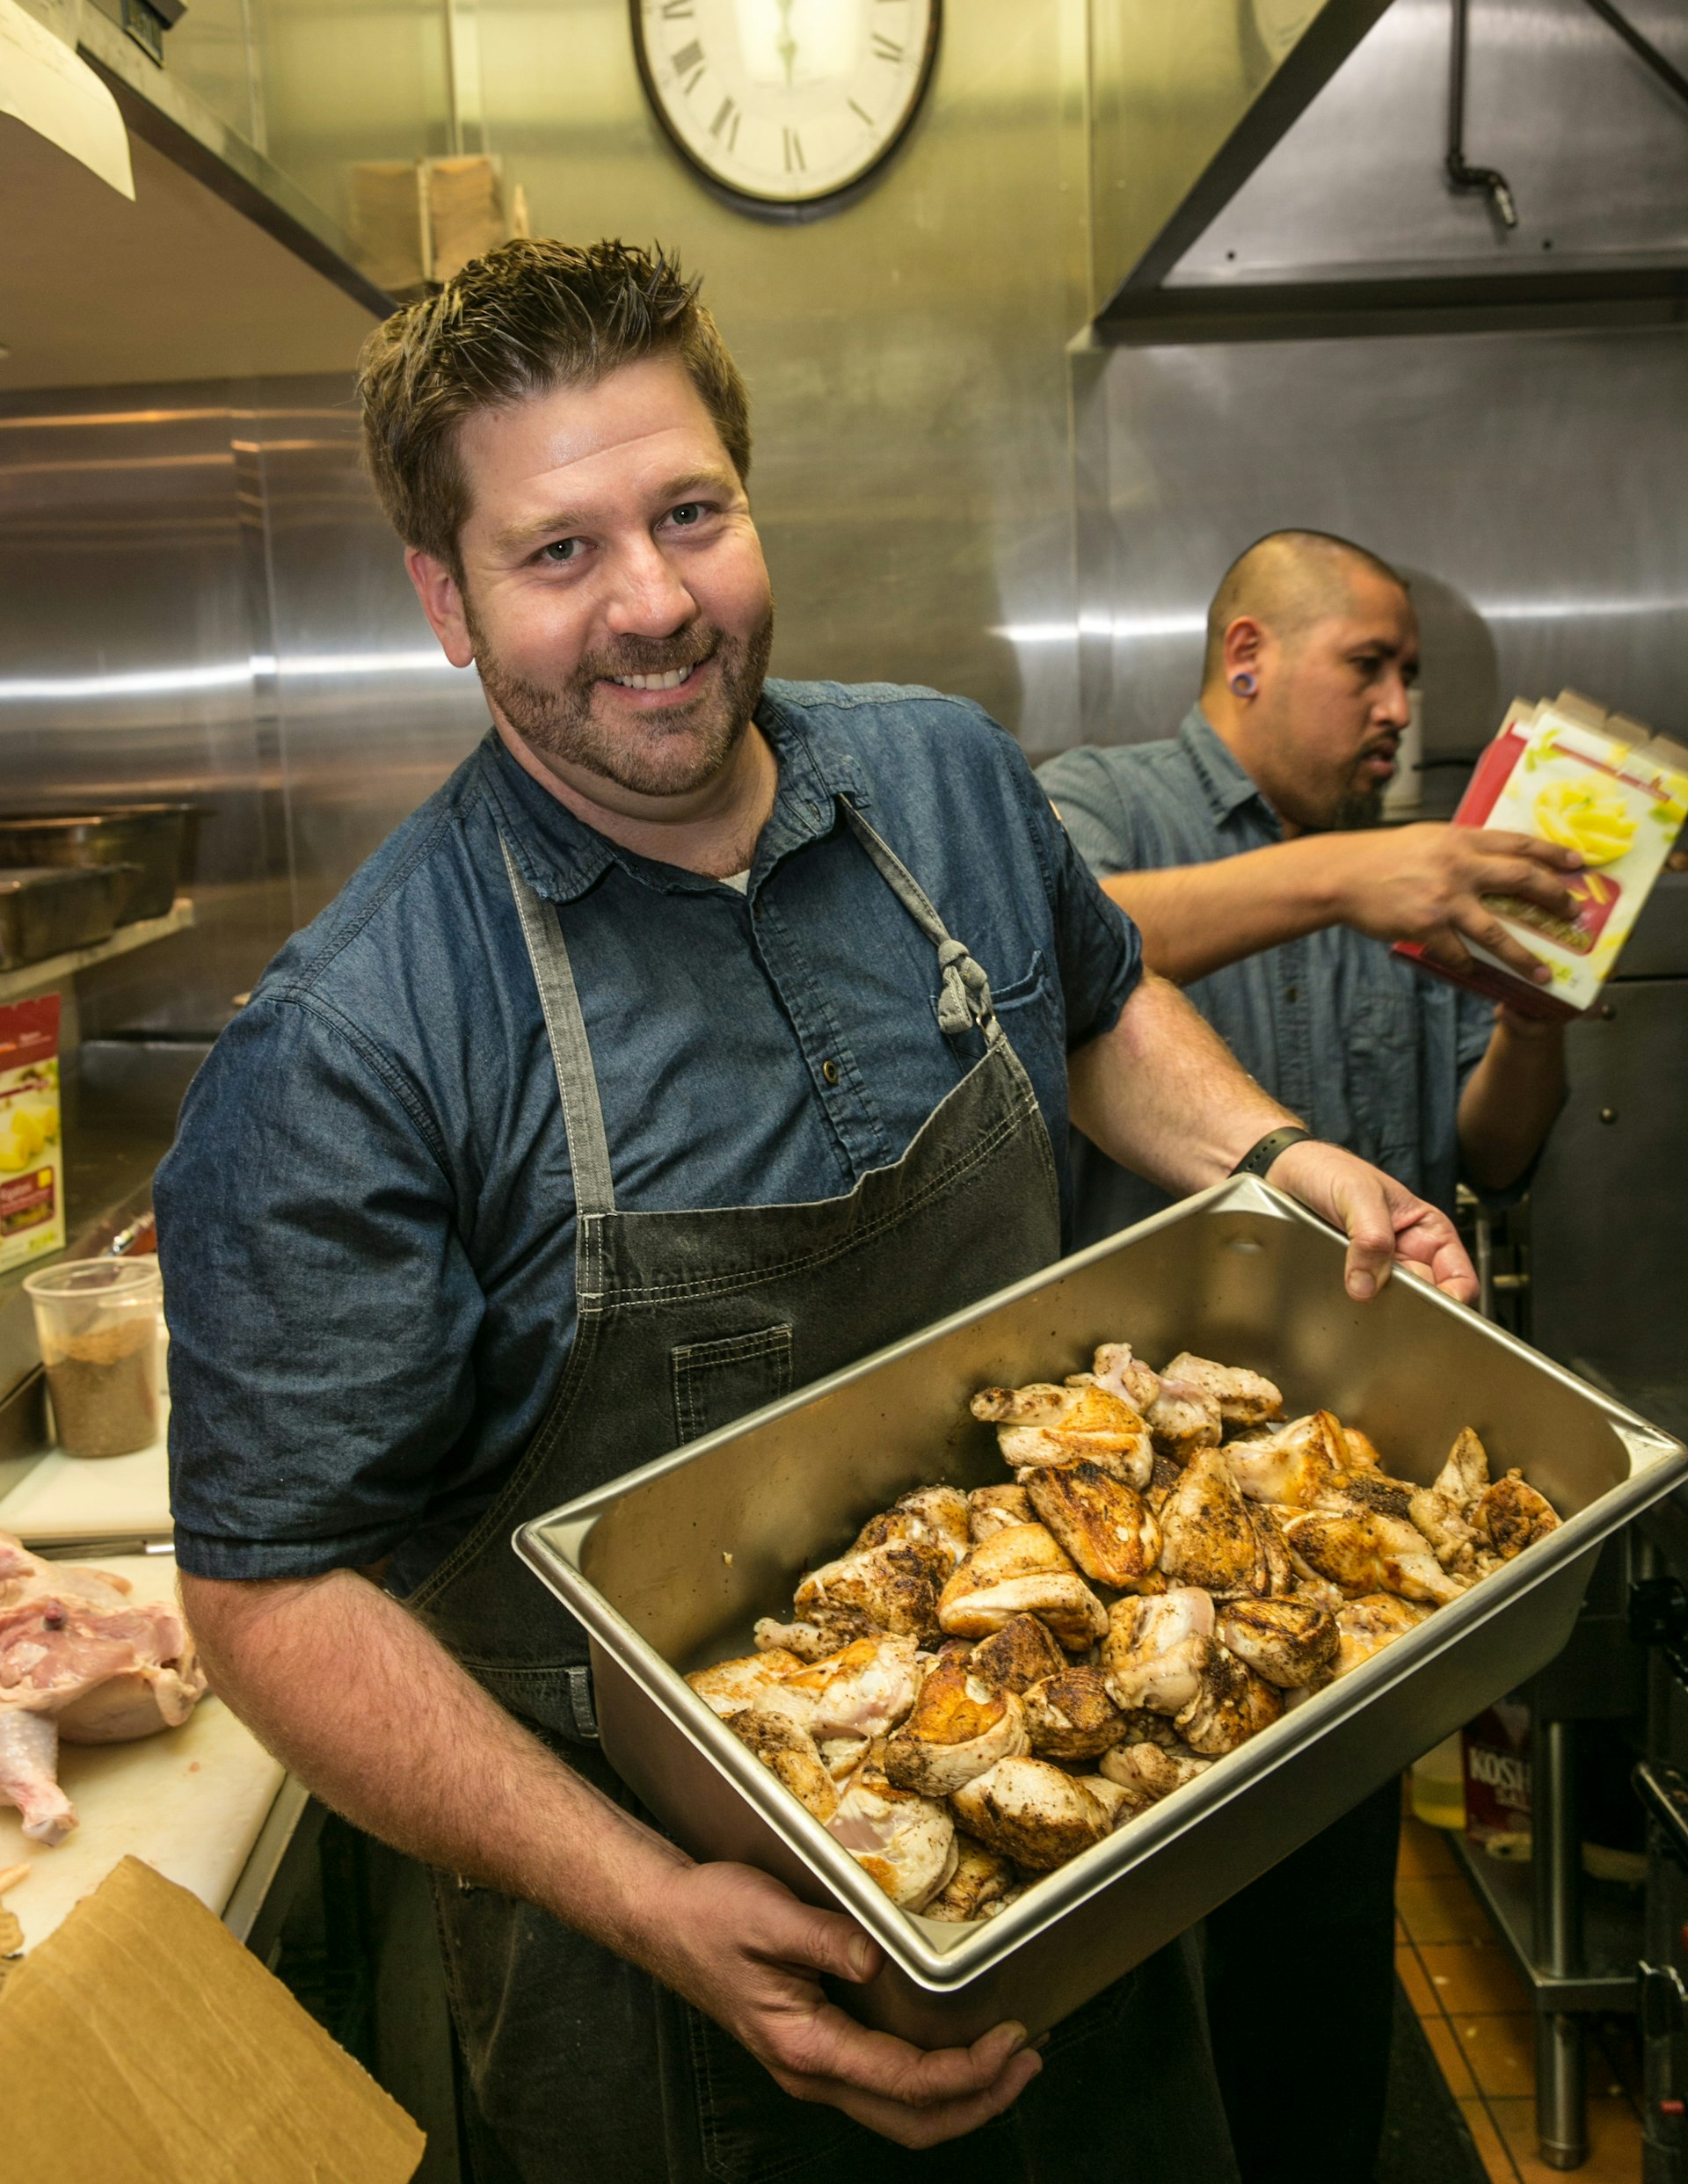 Dustin Valette smiles as he shows the camera a tray of chicken thighs while behind him, the line cook continues to prepare food for firefighters and first responders